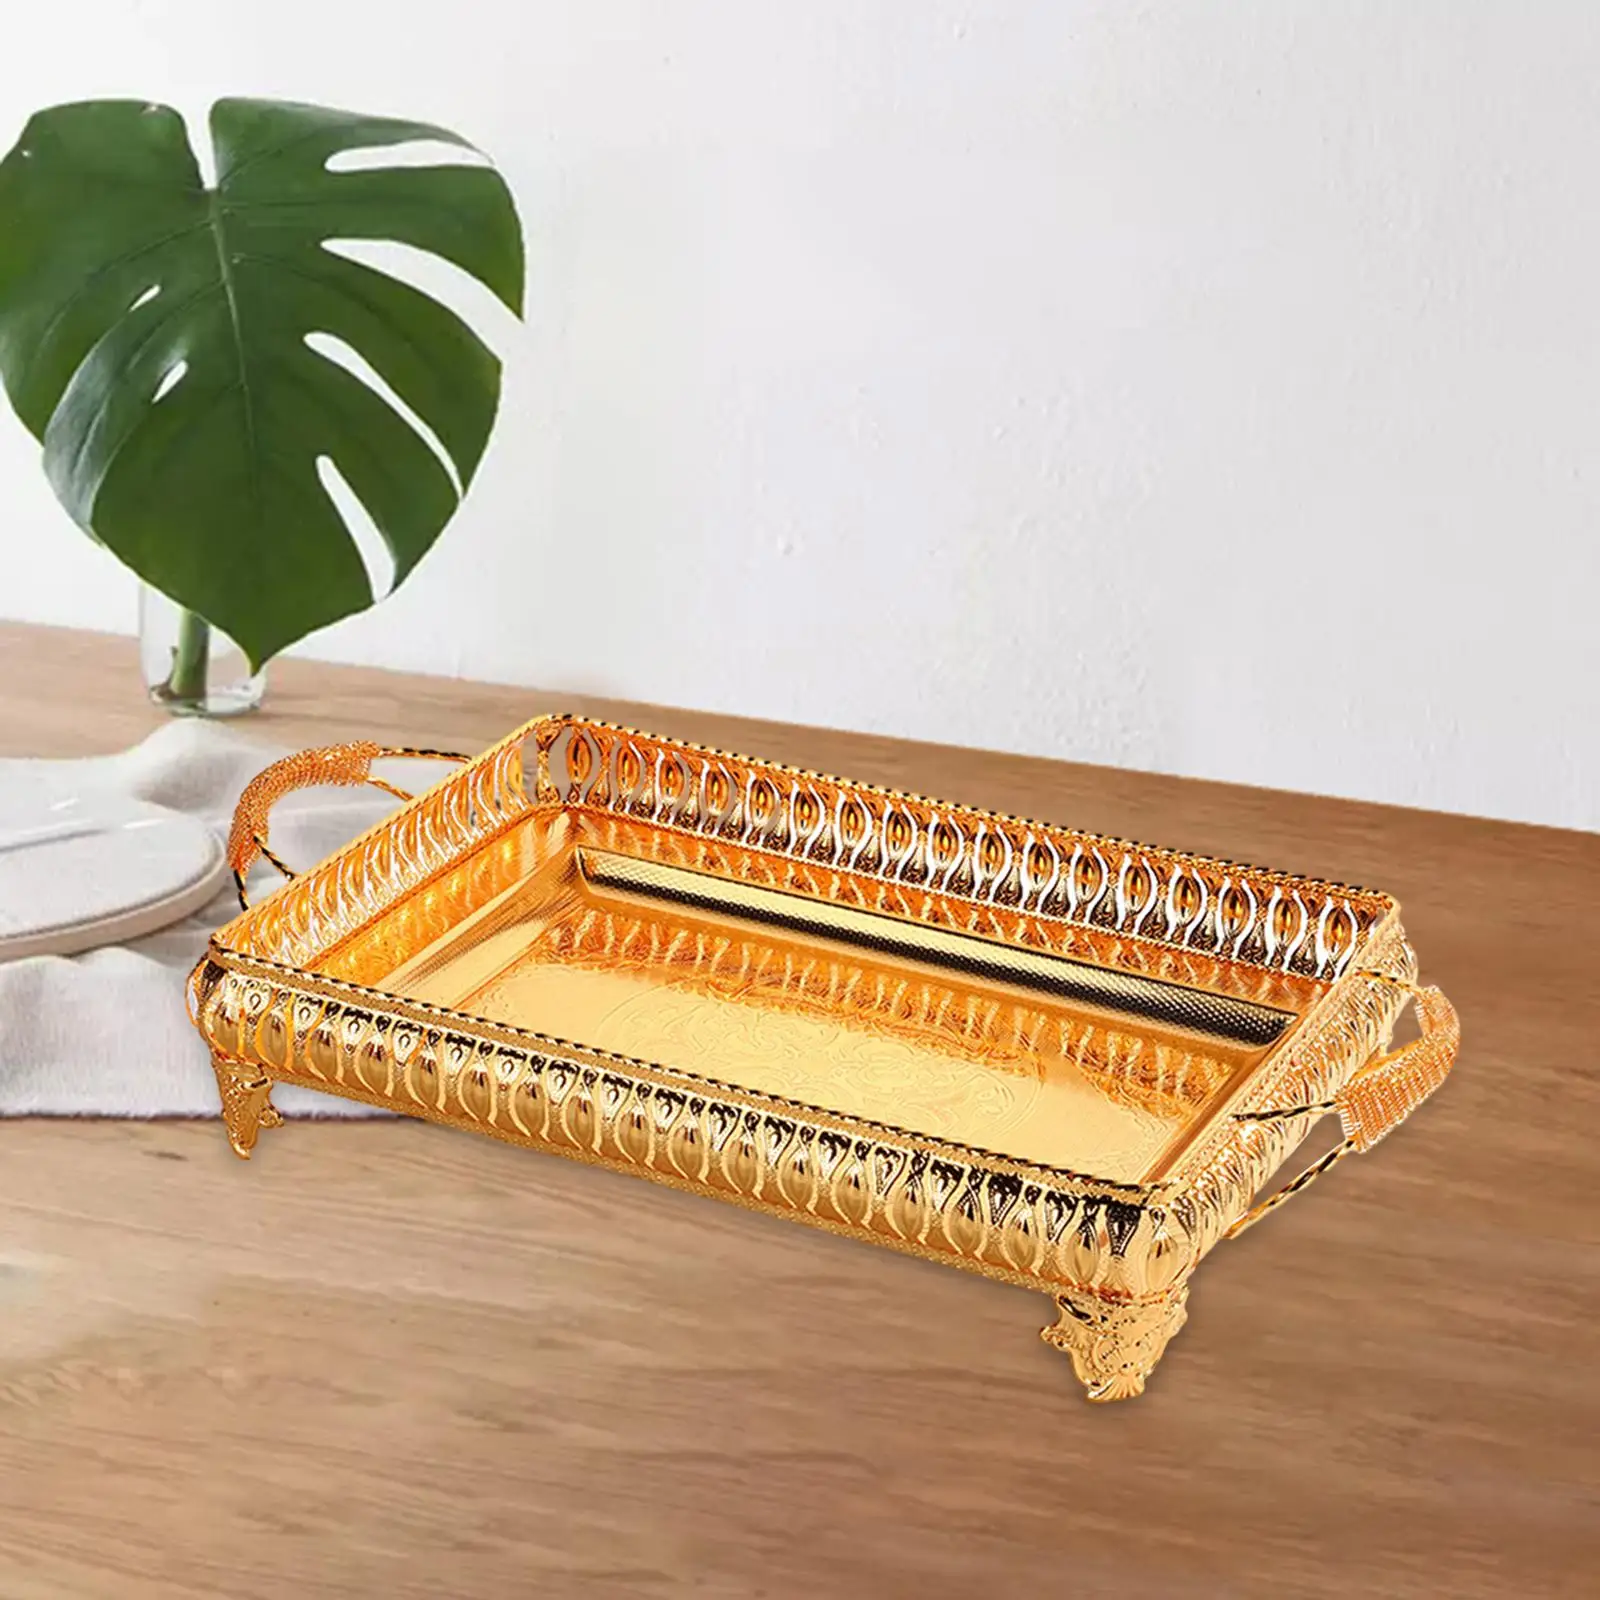 Snack Tray Photo Props Countertop Organizer Tray Multipurpose Serving Tray Metal Tray for Dinner Kitchen Bathroom Desktop Drinks